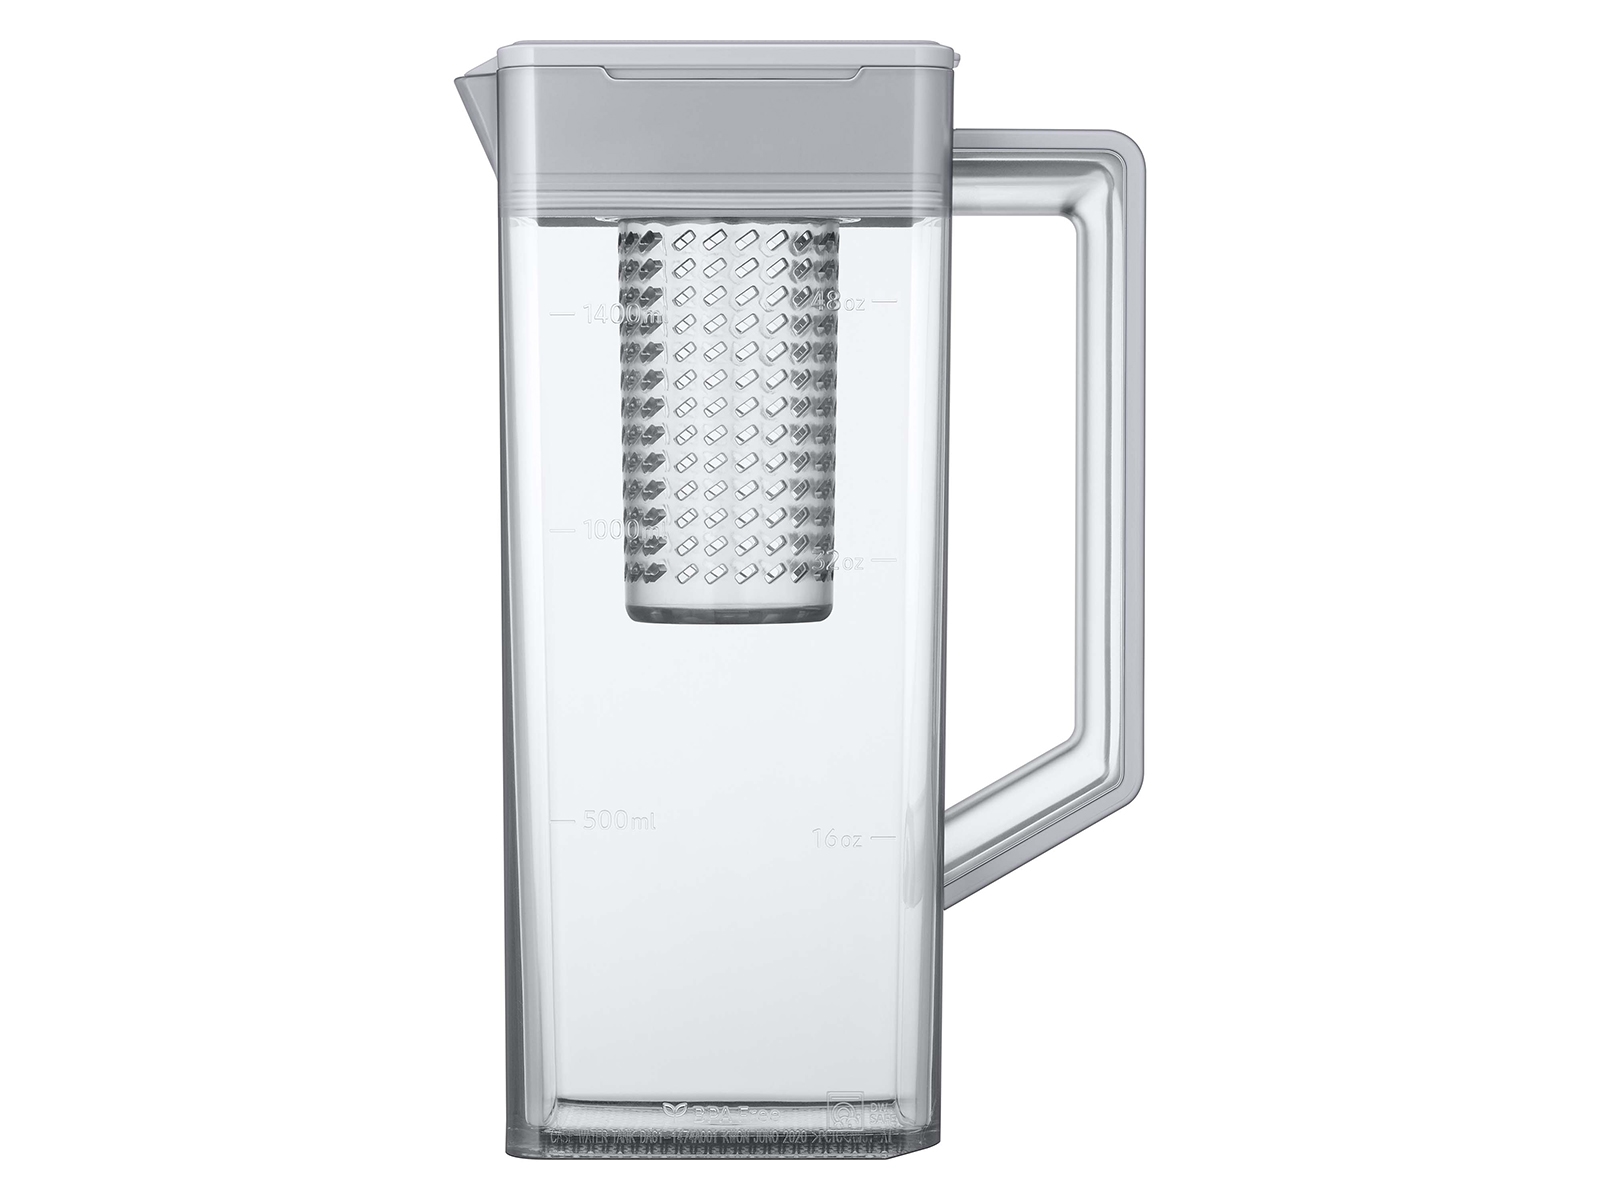 Thumbnail image of Bespoke 4-Door French Door Refrigerator (23 cu. ft.) with AutoFill Water Pitcher in White Glass